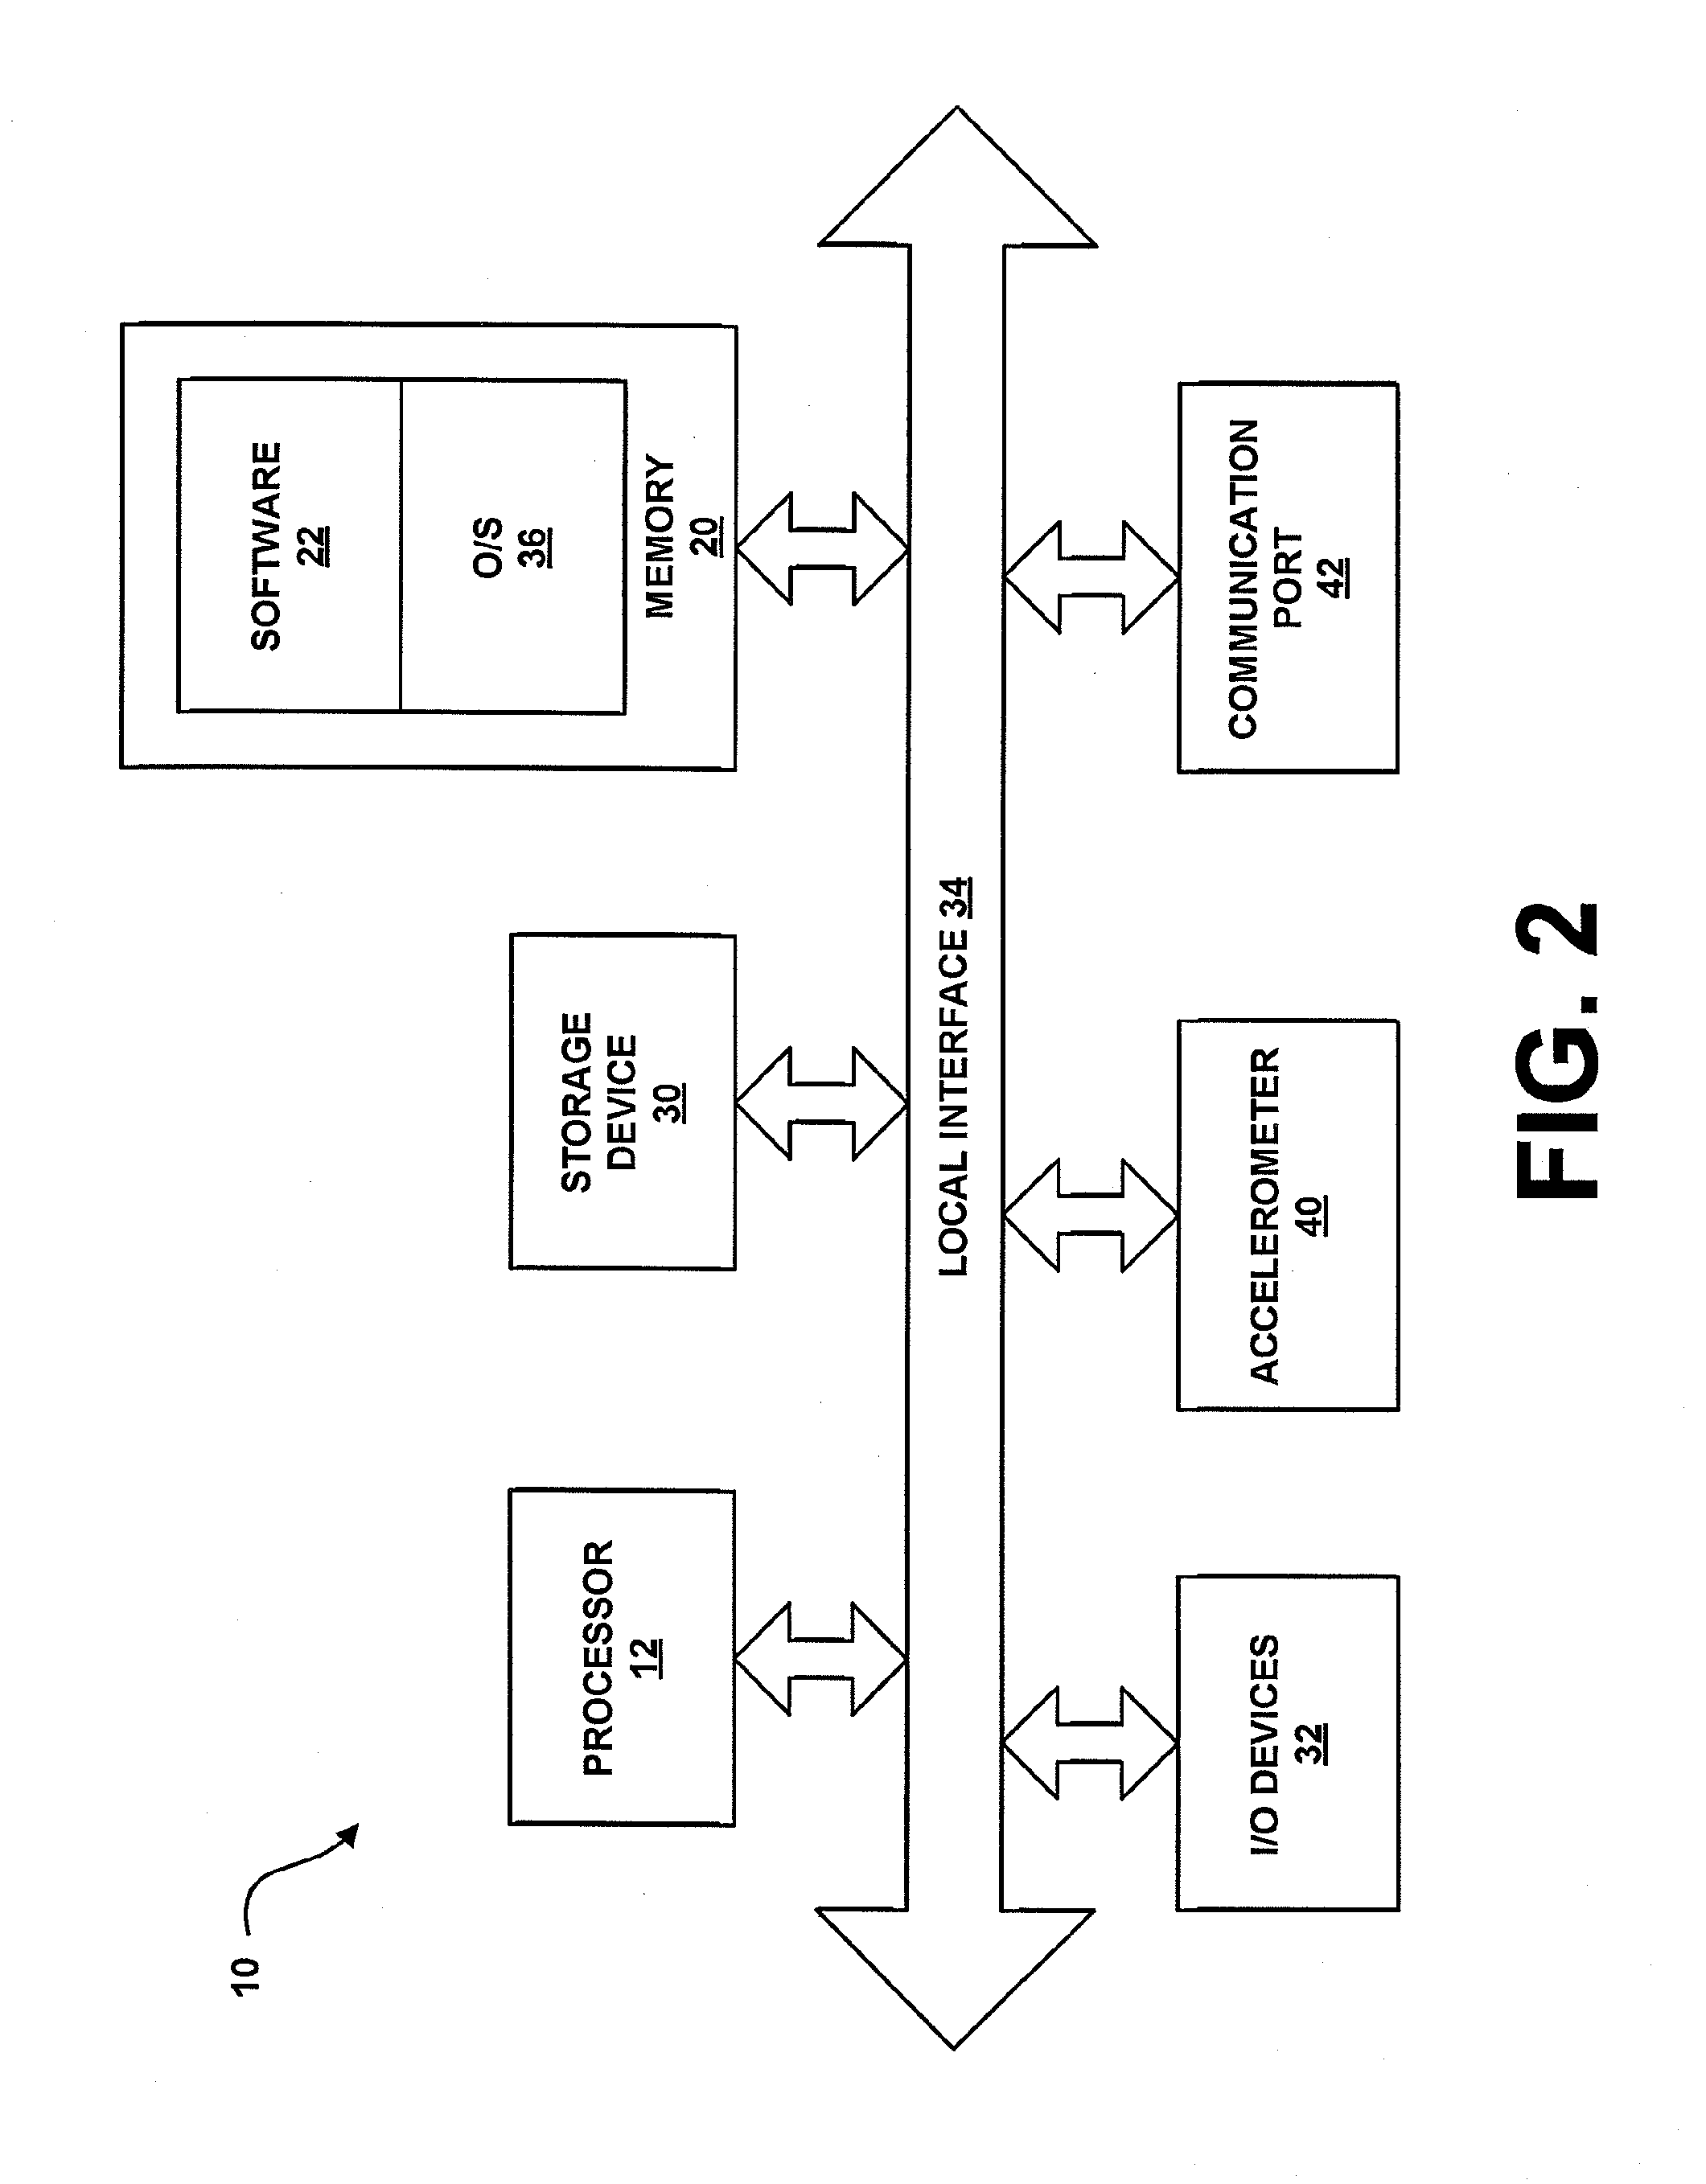 System and method for providing road condition and congestion monitoring